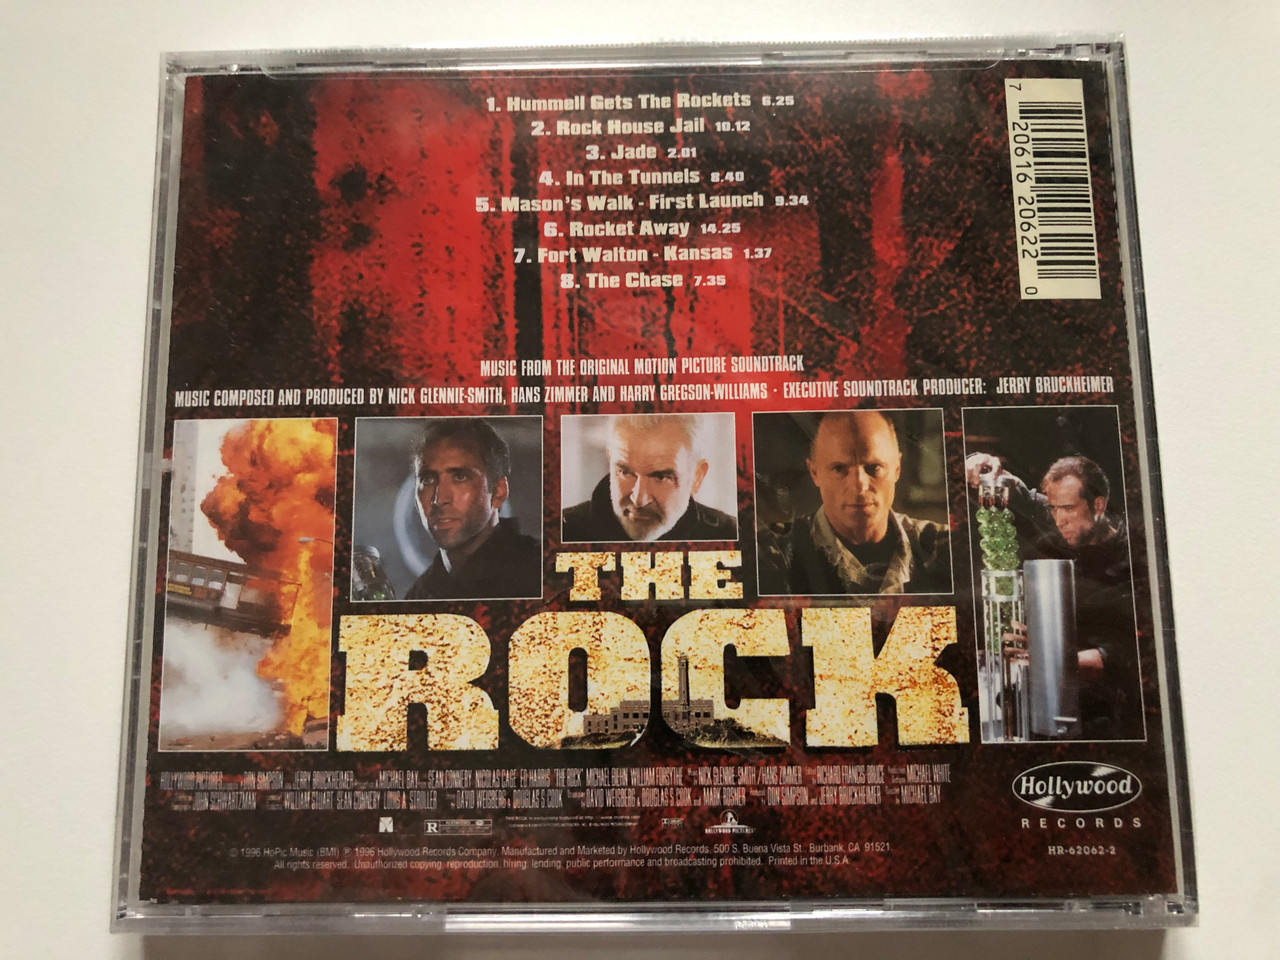 https://cdn10.bigcommerce.com/s-62bdpkt7pb/products/0/images/220653/The_Rock_Original_Motion_Picture_Score_-_Sean_Connery_Nicolas_Cage_Ed_Harris_Music_Composed_and_Produced_by_Nick_Glennie-Smith_Hans_Zimmer_and_Harry_Gregson-Williams_Hollywood_Records__78644.1649169442.1280.1280.JPG?c=2&_gl=1*ct8mva*_ga*MjA2NTIxMjE2MC4xNTkwNTEyNTMy*_ga_WS2VZYPC6G*MTY0OTE2ODI5OS4zNDMuMS4xNjQ5MTY4OTYwLjQx